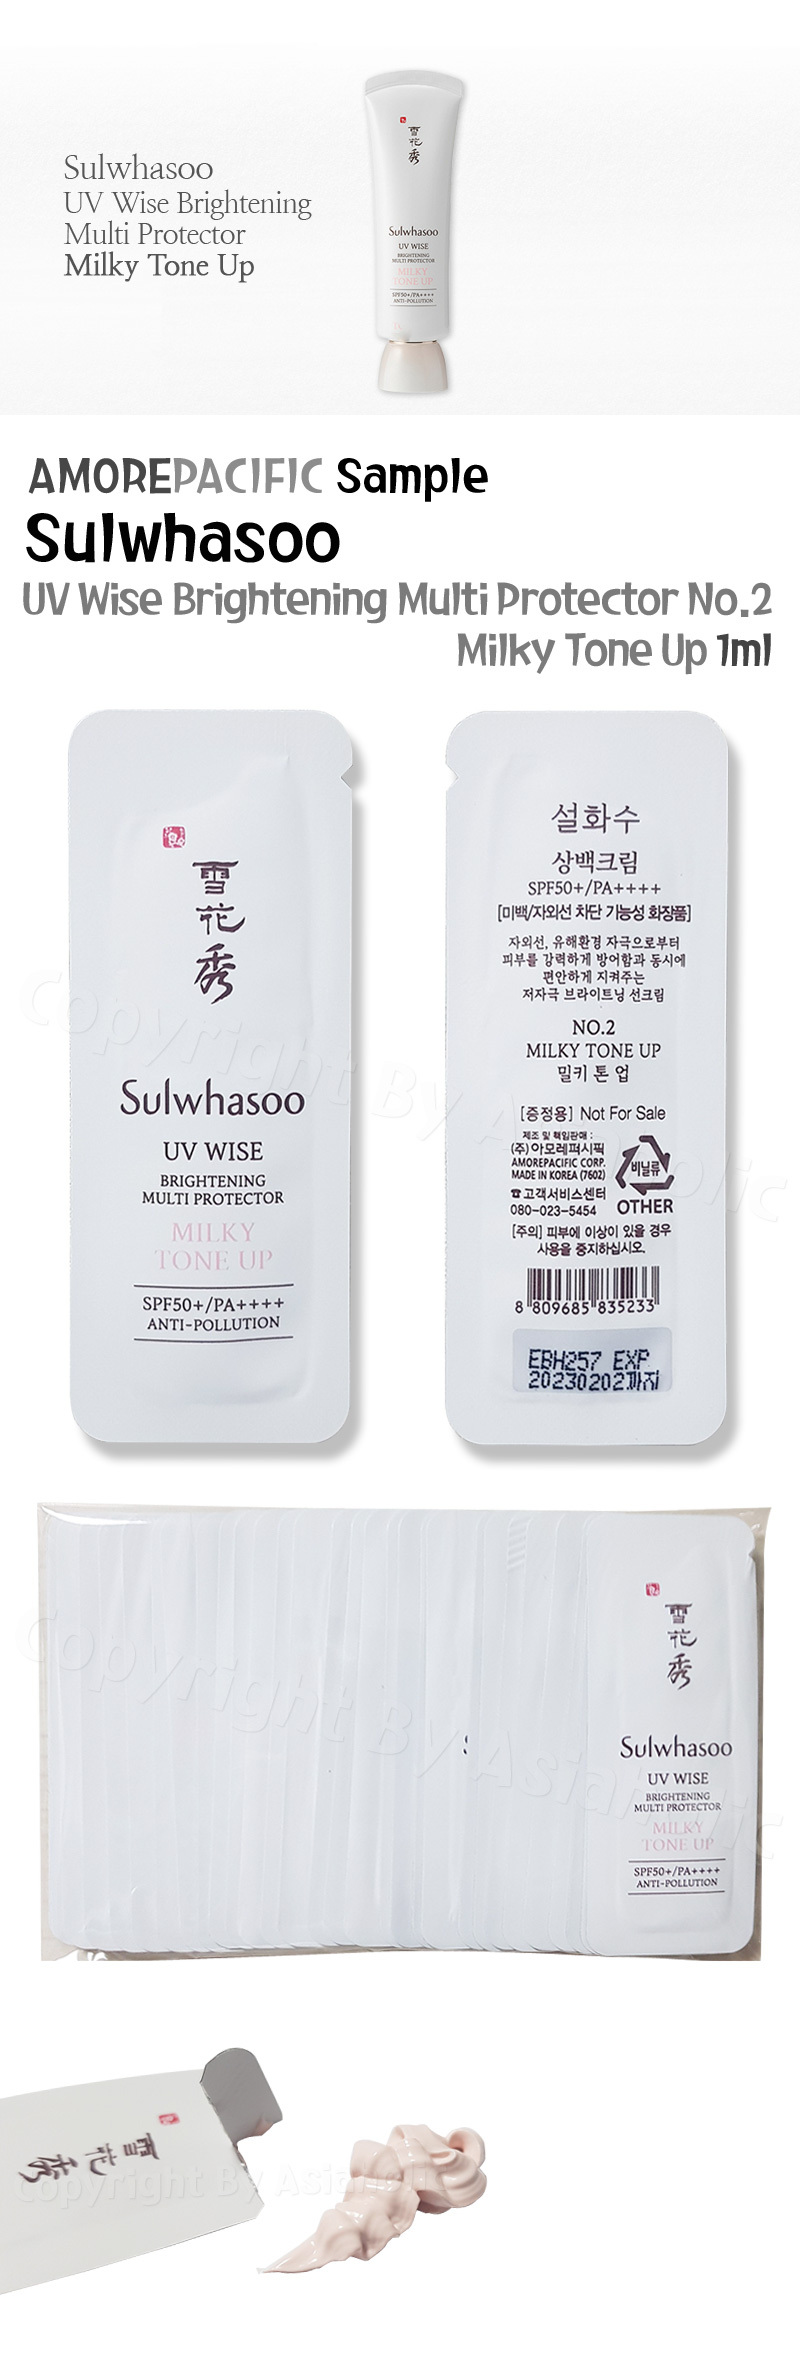 Sulwhasoo UV Wise Brightening Multi Protector No.2 Milky Tone Up 10ml x 10pcs Sample Newest Version